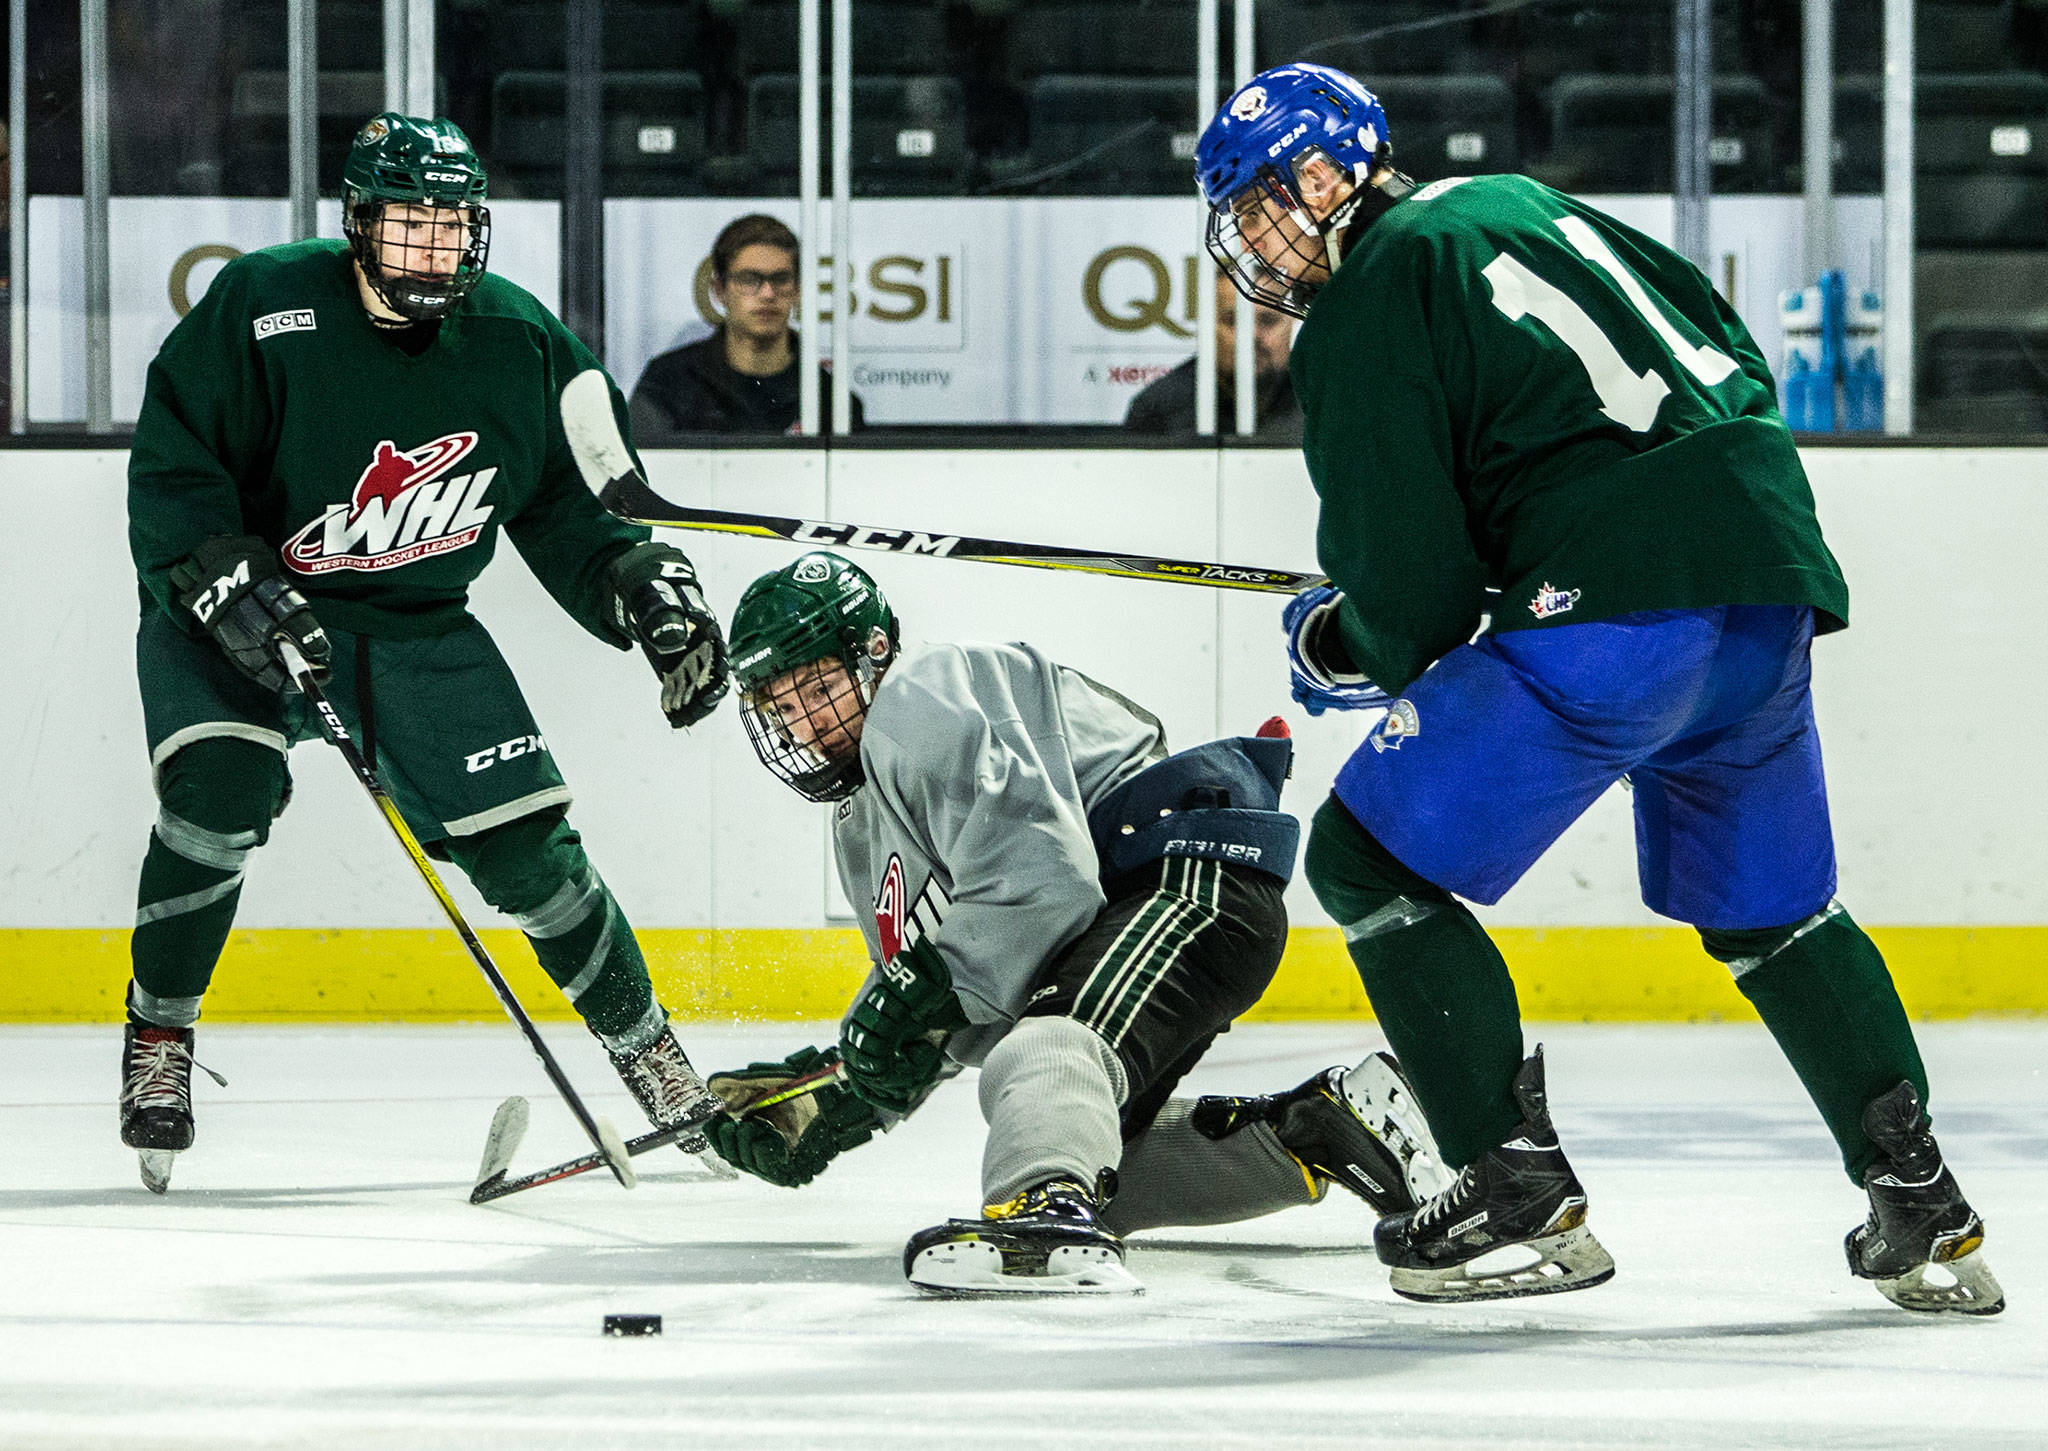 Everett’s Jack Lambert (center) scrambles for a loose puck with Nate Goodbrandson (left) and Blake Setter (right) during the Slivertips’ annual Green-Grey scrimmage on Aug. 25 in Everett. (Olivia Vanni / The Herald)